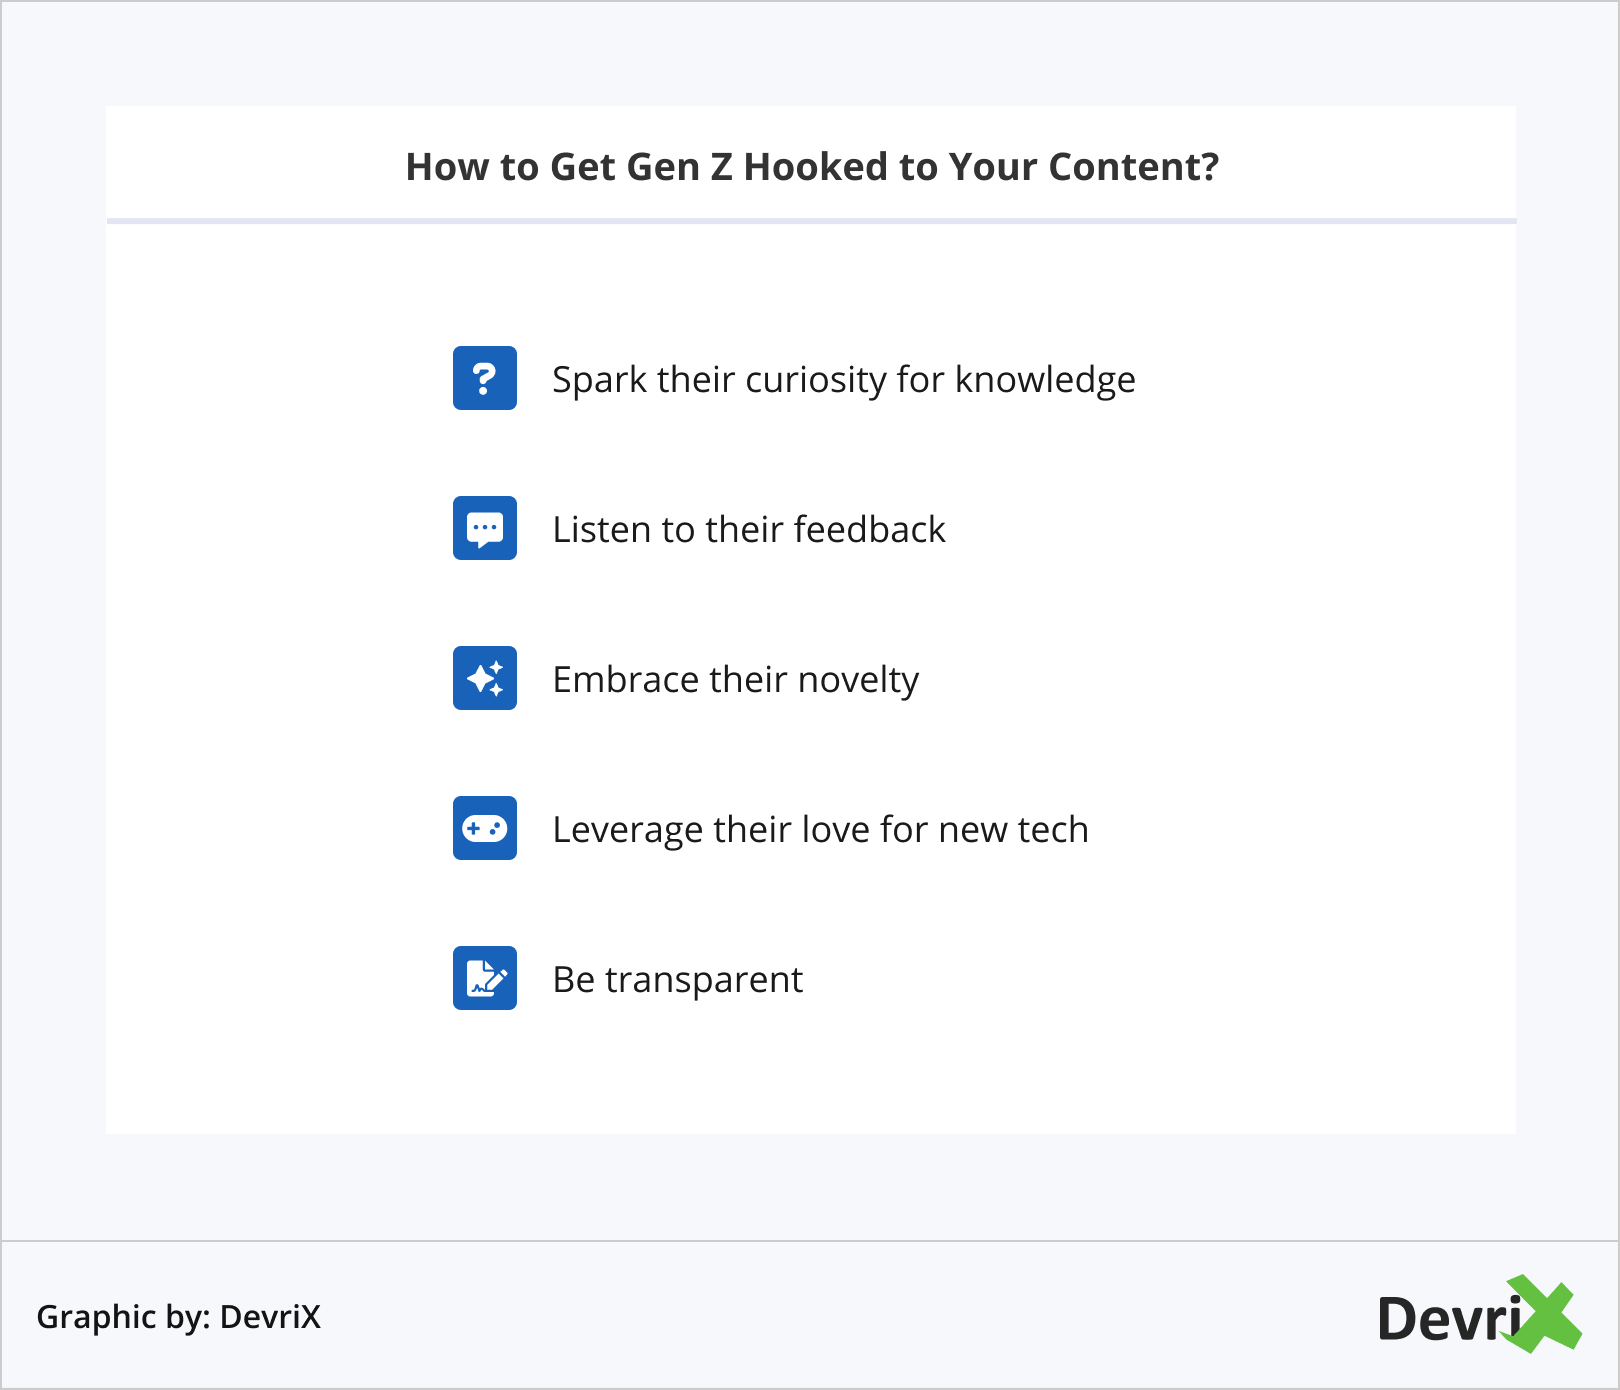 How to Get Gen Z Hooked to Your Content